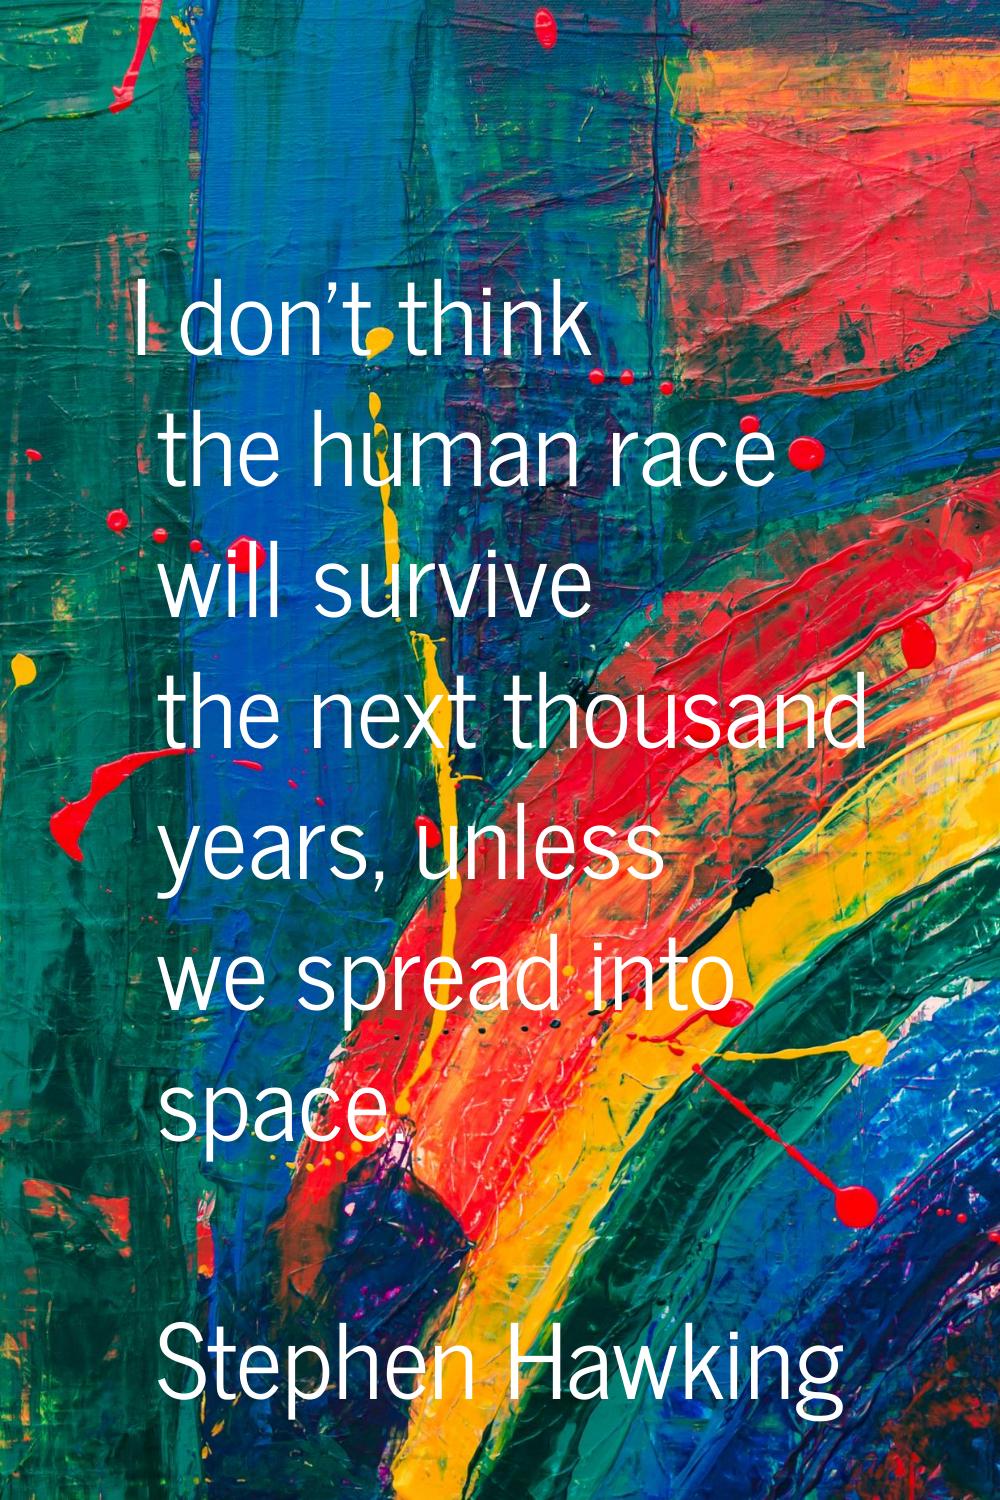 I don't think the human race will survive the next thousand years, unless we spread into space.